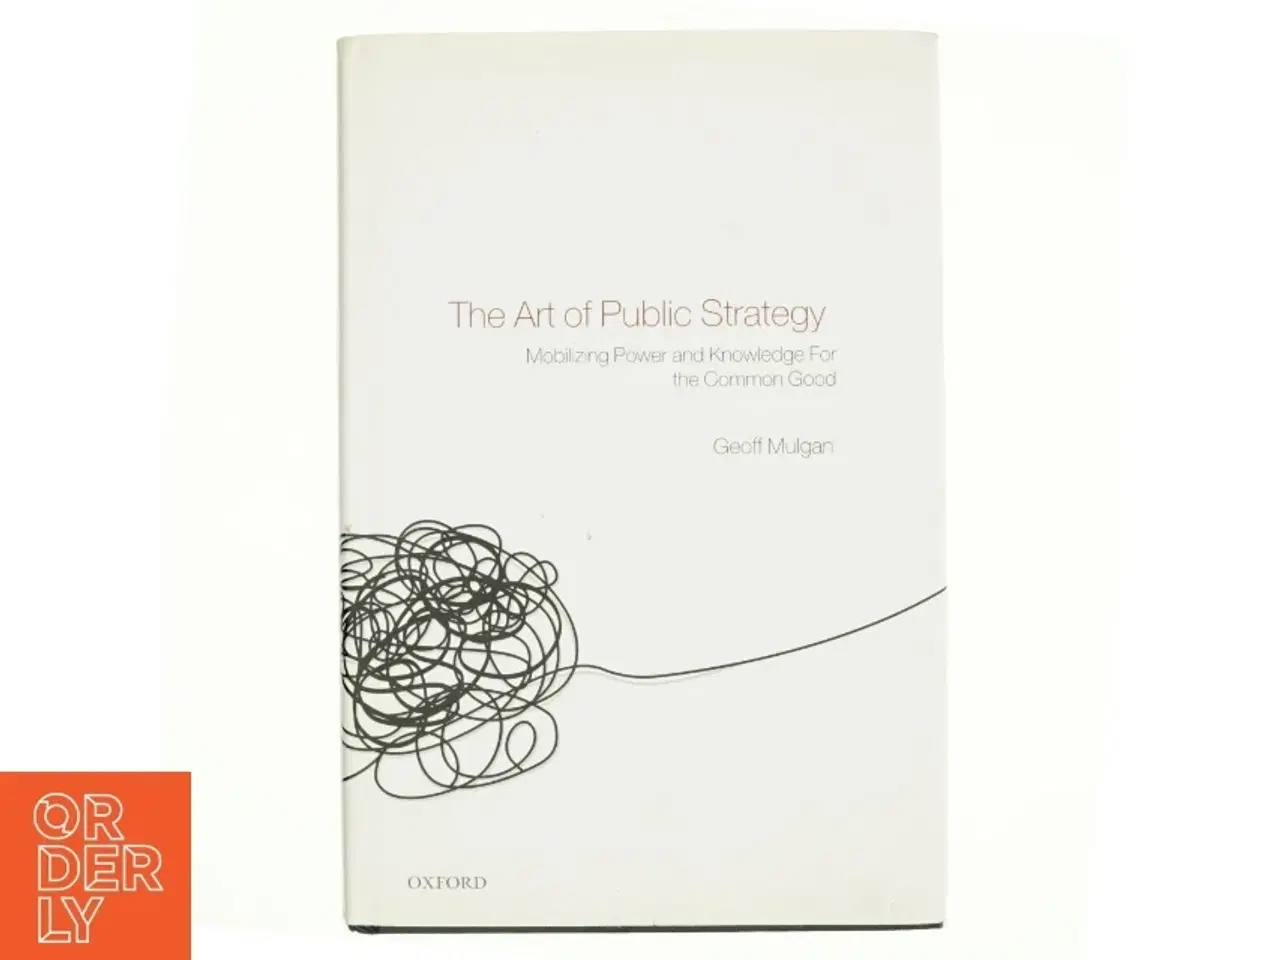 Billede 1 - The art of public strategy : mobilizing power and knowledge for the common good af Geoff Mulgan (Bog)